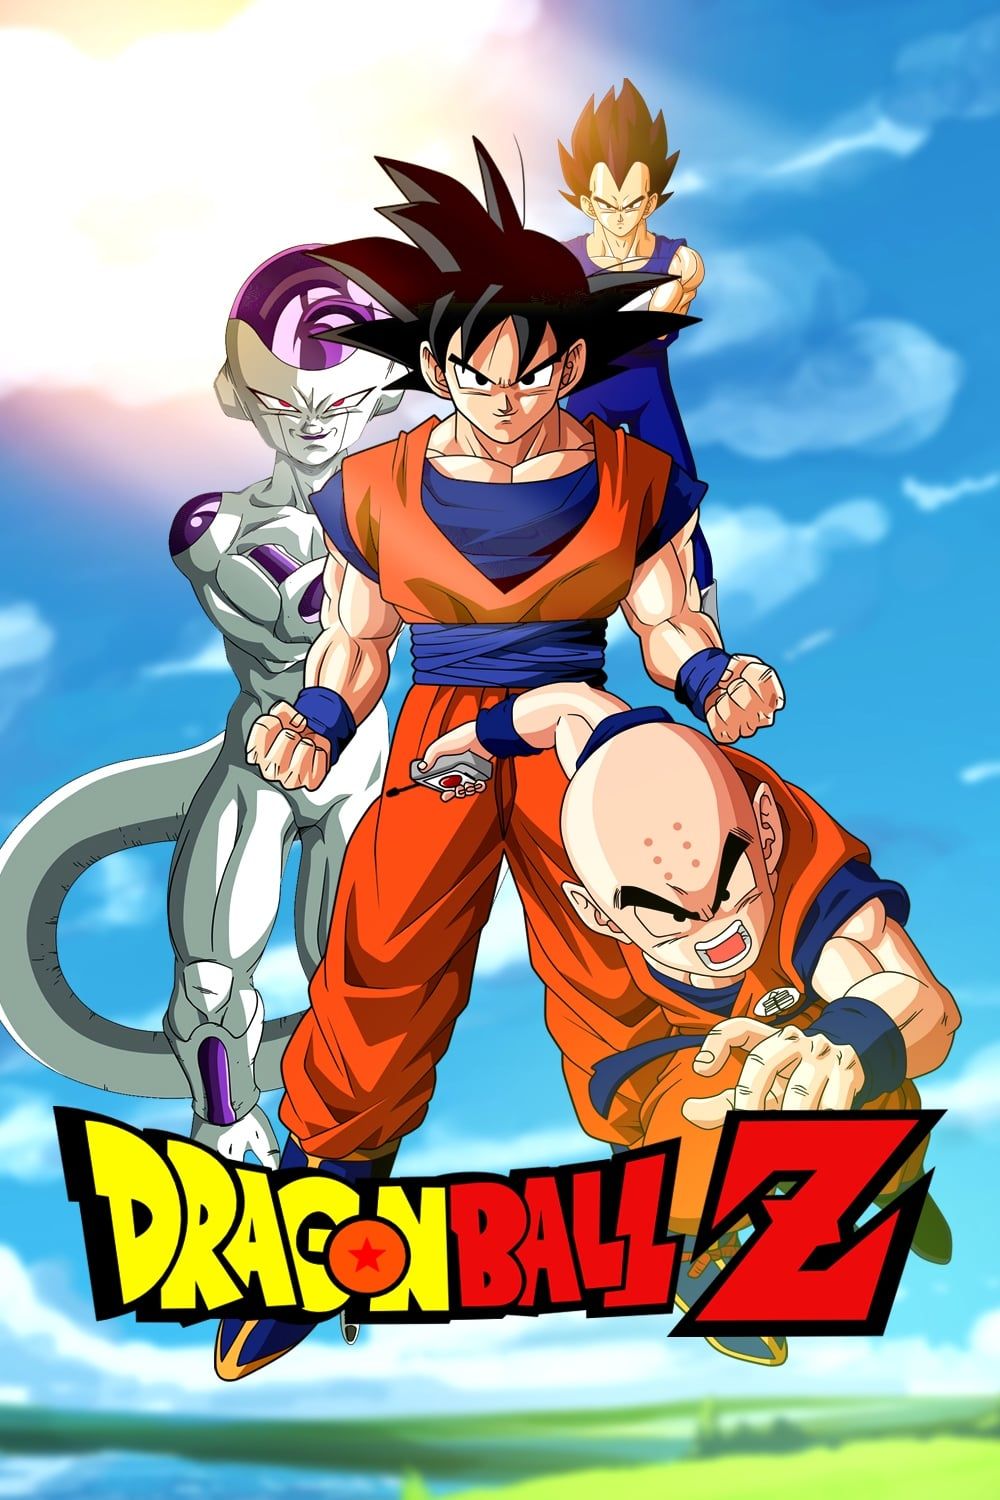 Buy Dragon Ball Z Poster Online In India -  India